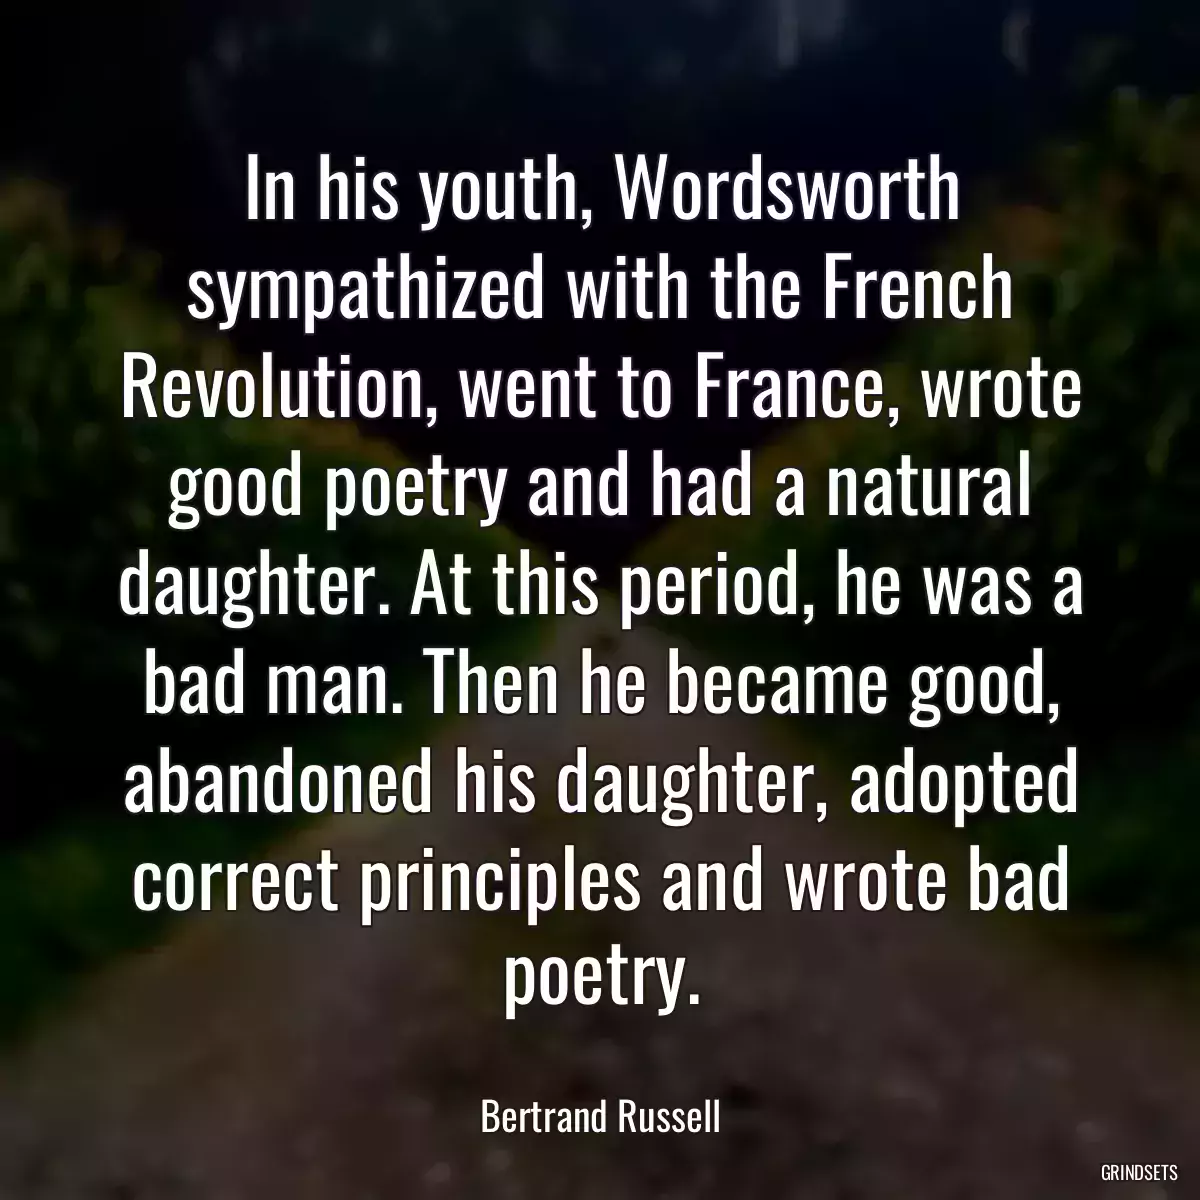 In his youth, Wordsworth sympathized with the French Revolution, went to France, wrote good poetry and had a natural daughter. At this period, he was a bad man. Then he became good, abandoned his daughter, adopted correct principles and wrote bad poetry.